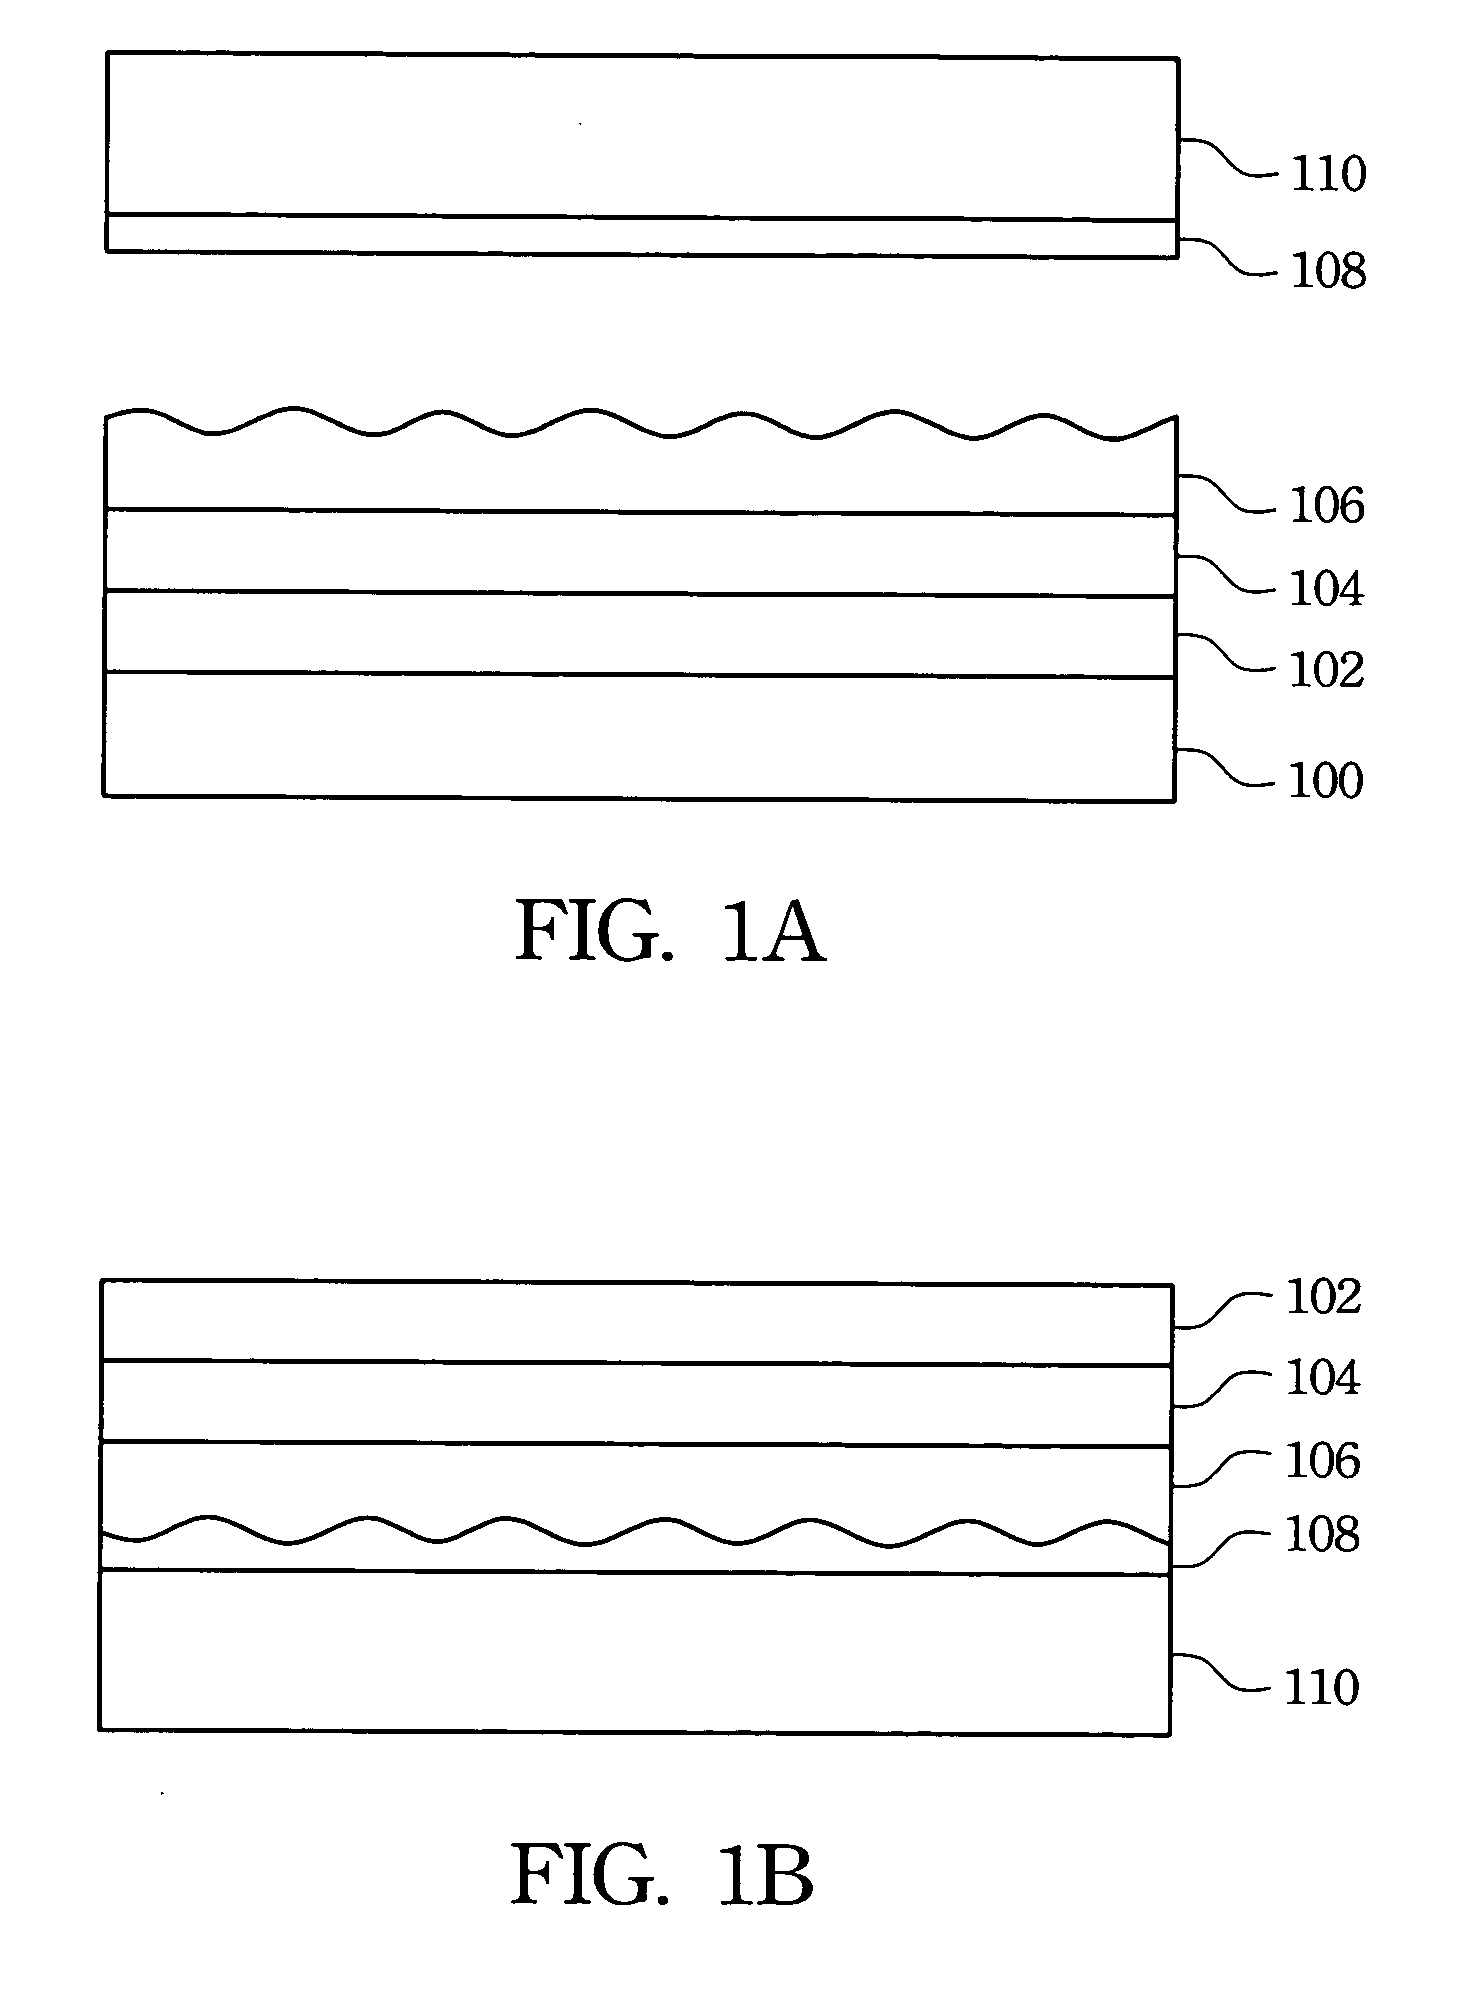 Method of fabricating algainp light-emitting diode and structure thereof